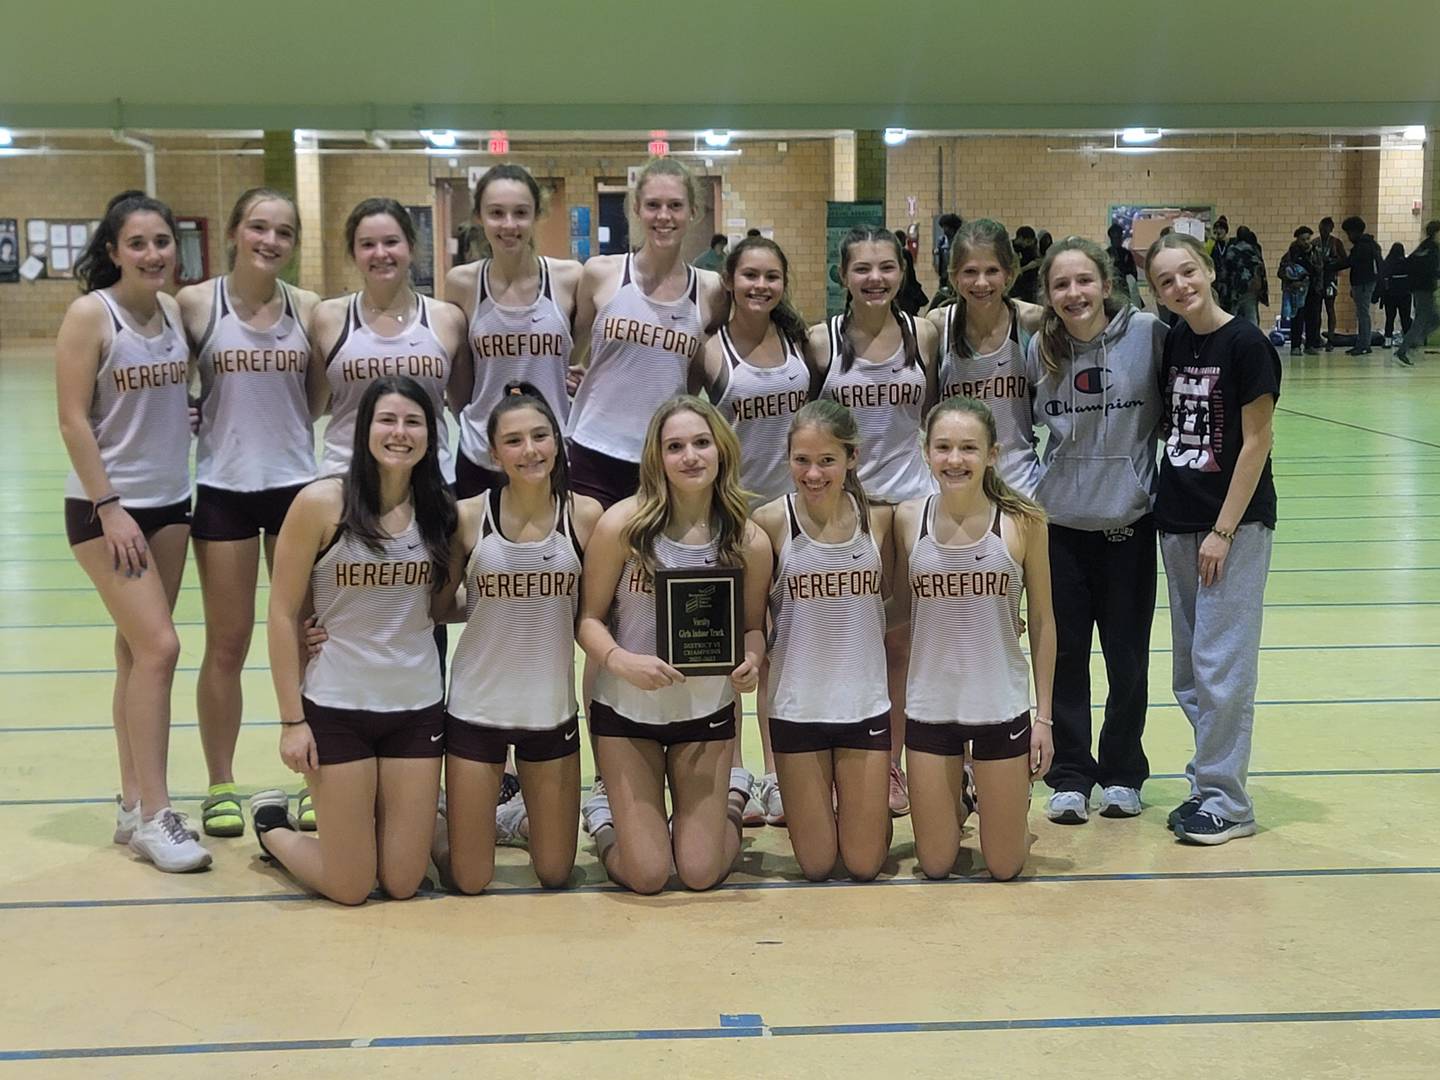 The Hereford girls indoor track and field team poses with their plaque after winning the Baltimore County championship on Tuesday.